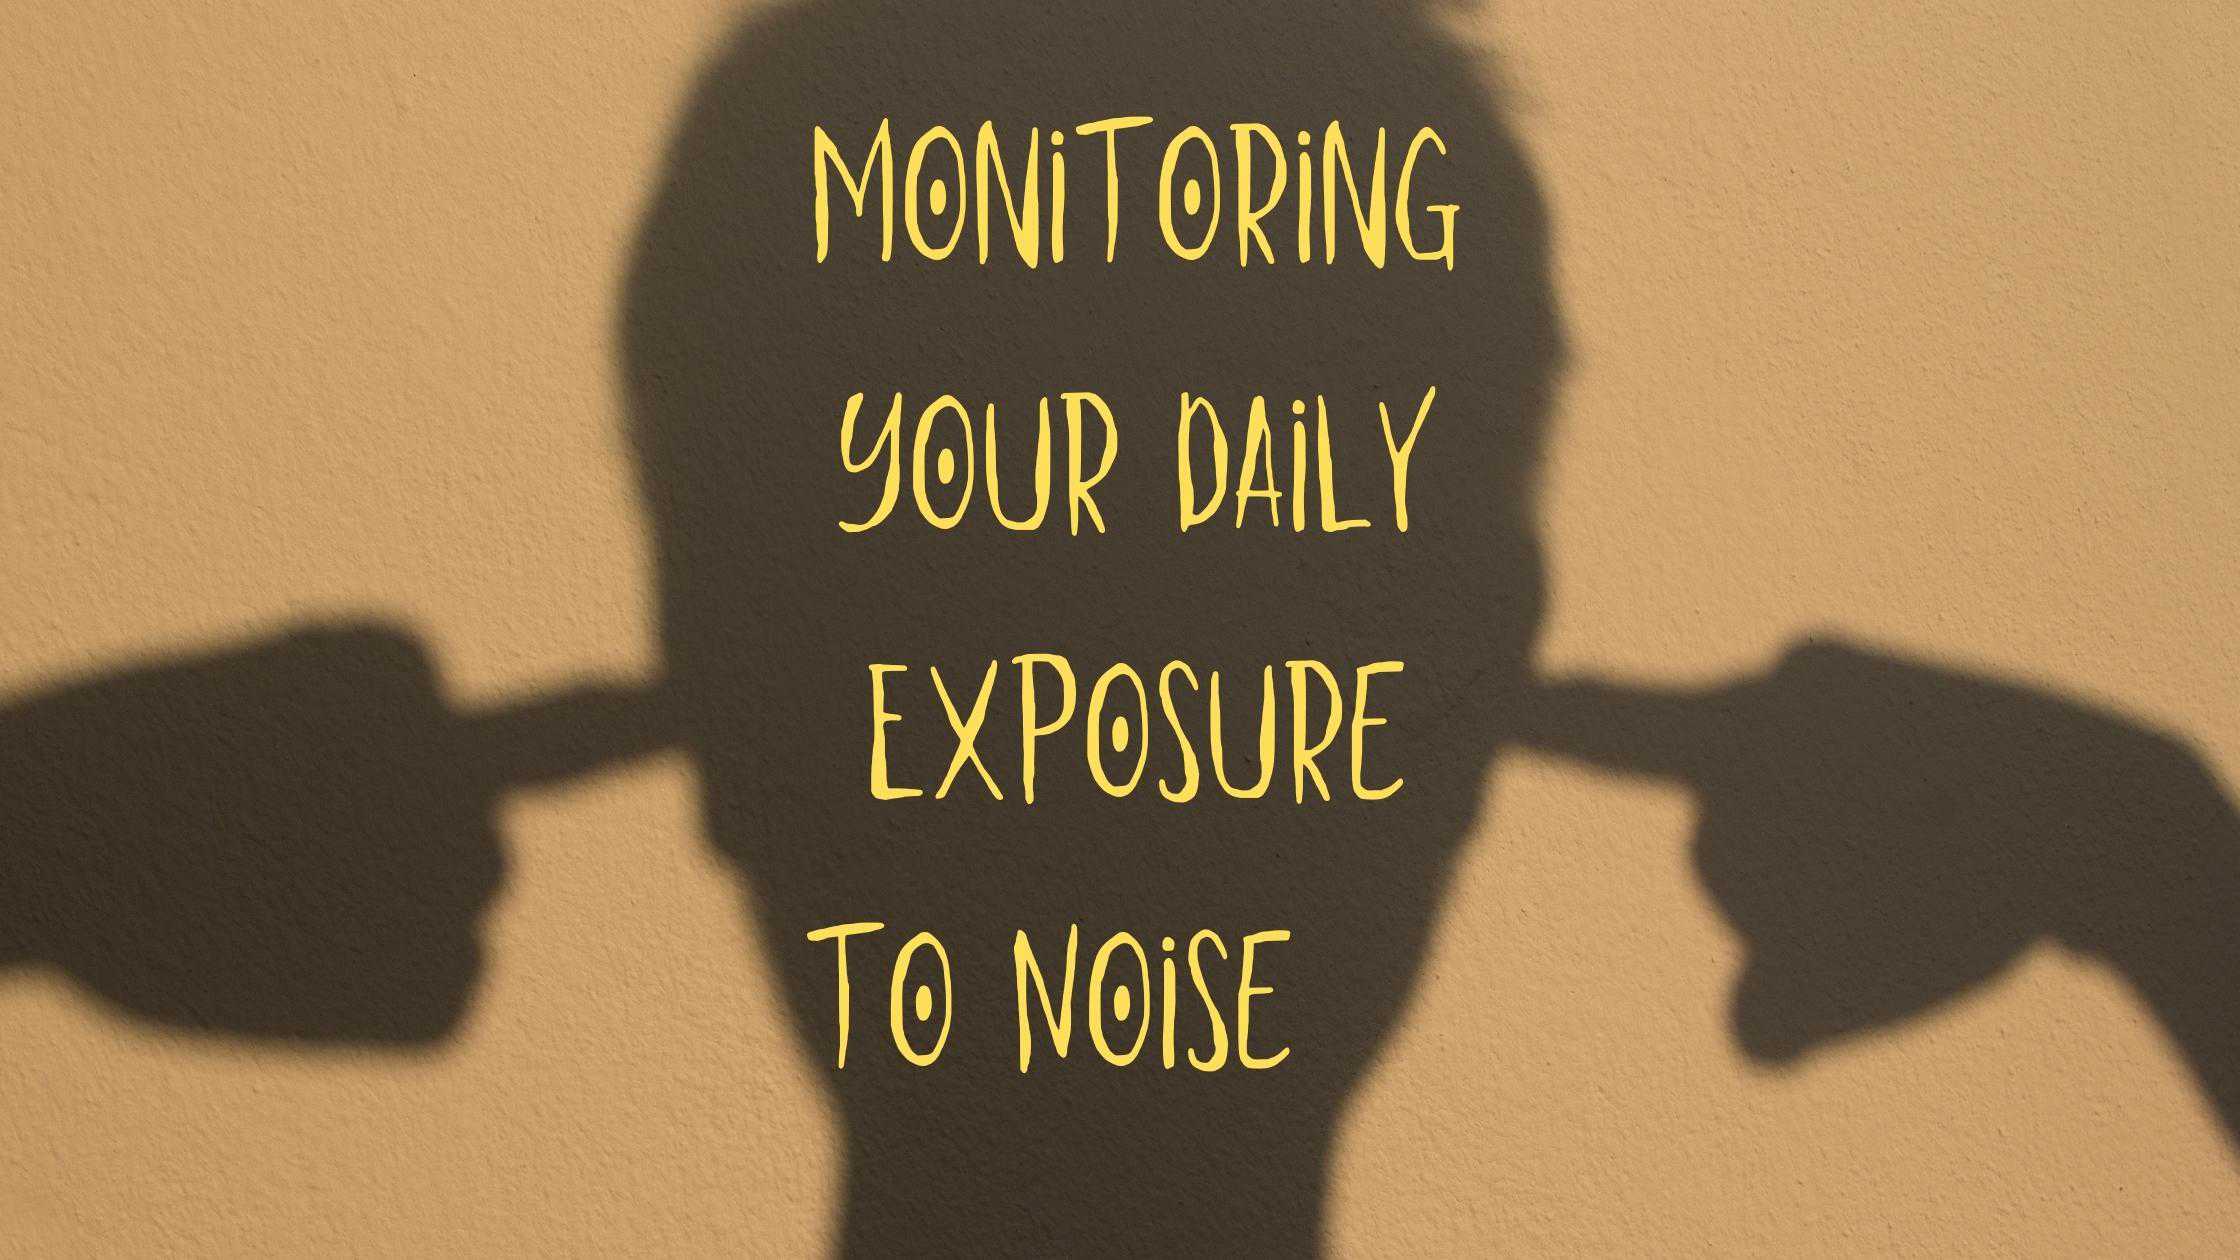 Monitoring Your Daily Exposure to Noise